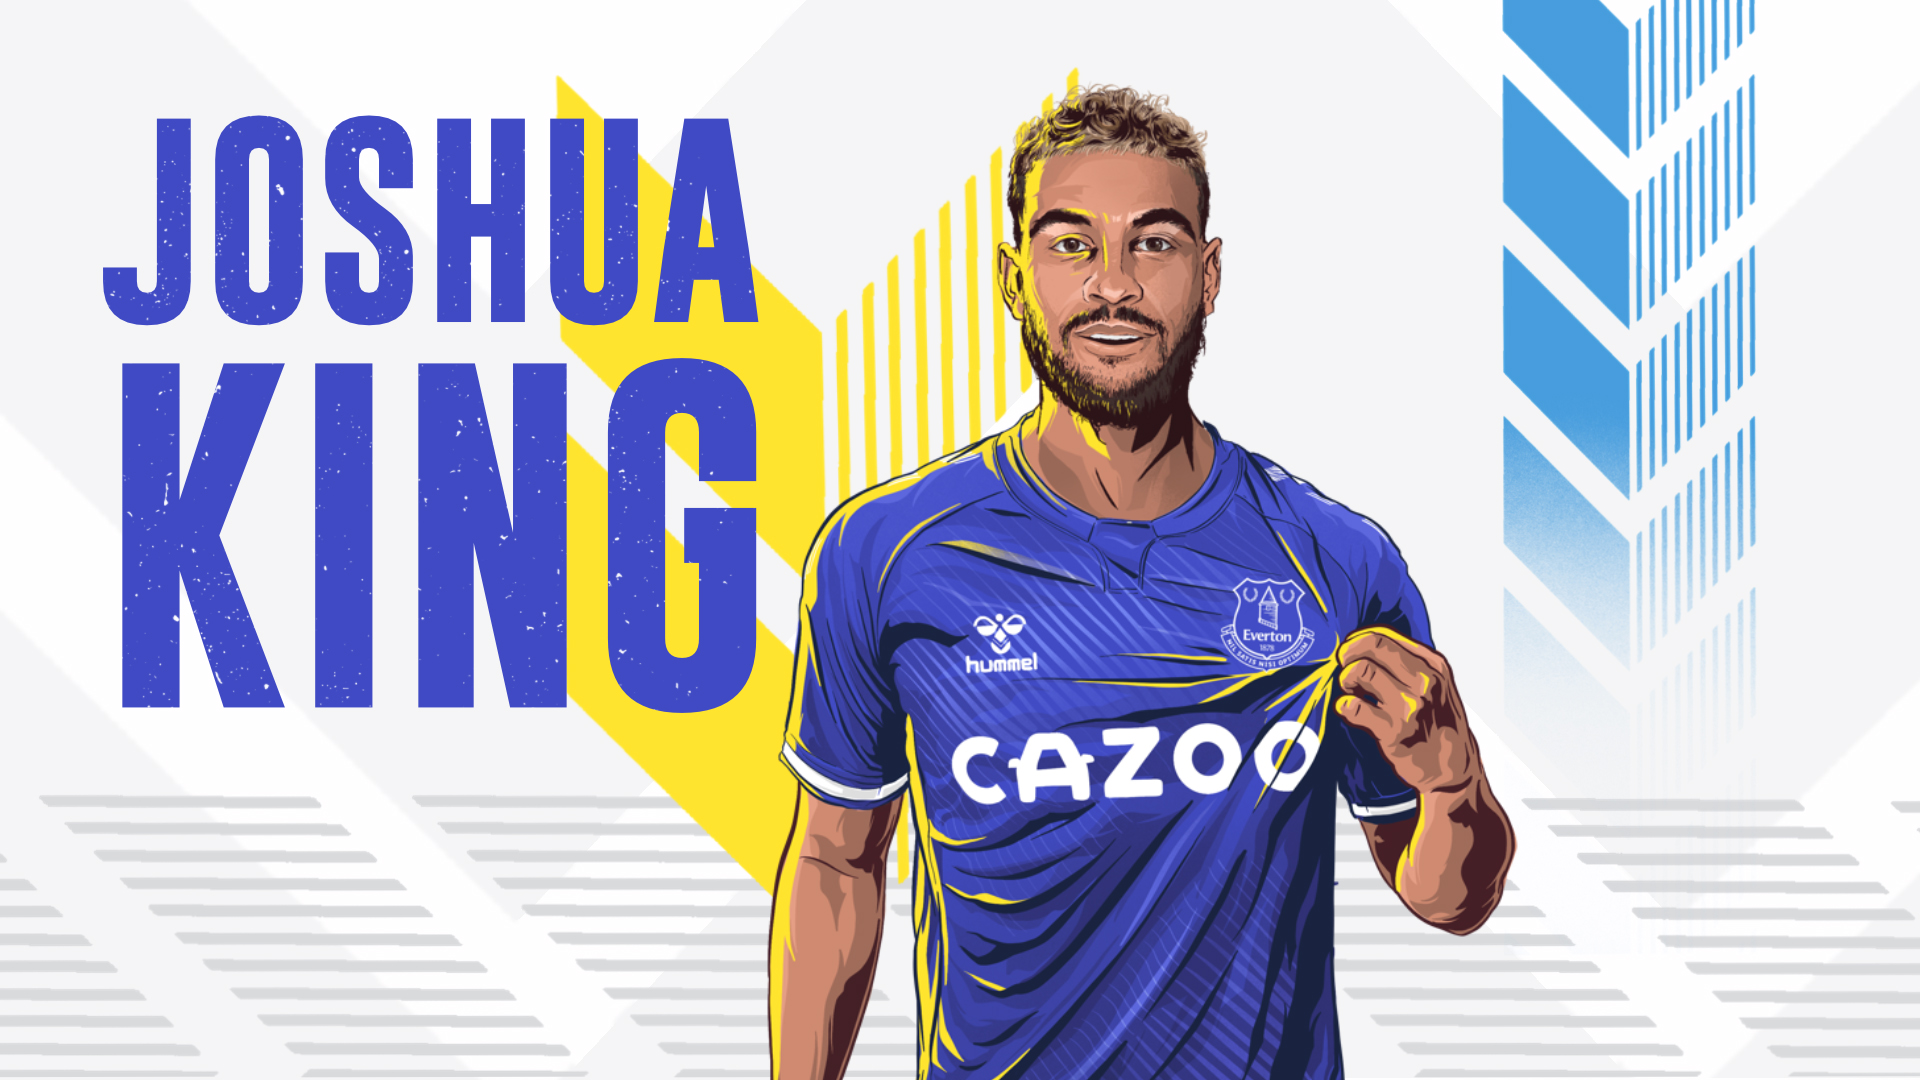 King Signs For Everton